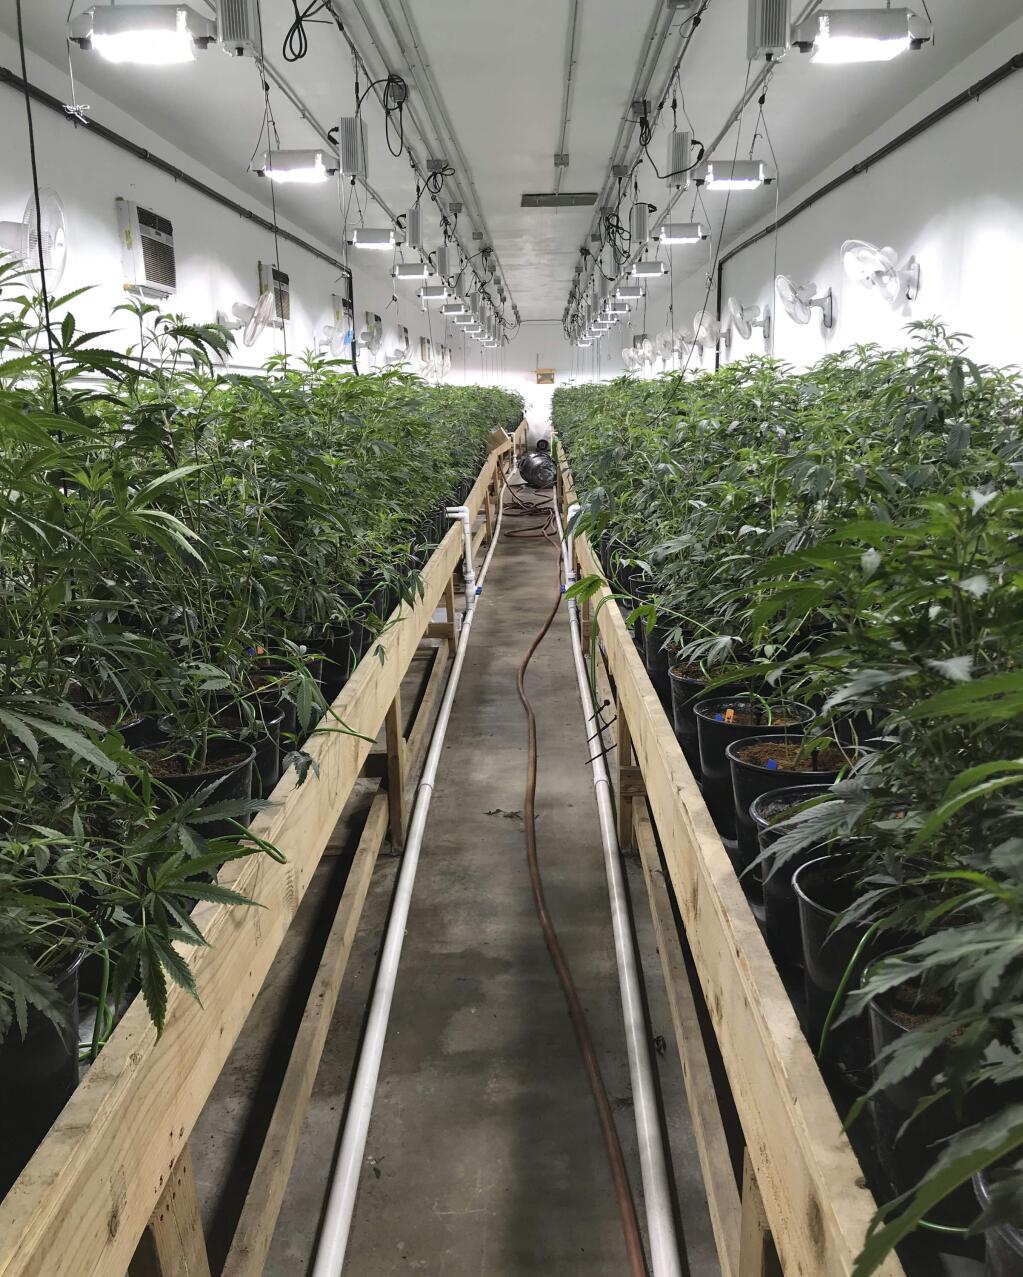 In this Wednesday, Dec. 13, 2017 photo released by the San Bernardino Police Department, is a shut down marijuana operation of some 35,000 plants they believe was bringing in millions of dollars a month in San Bernardino, Calif. Police say eight people were detained Wednesday when police and federal agents raided a warehouse that was converted into a multi-level grow house. They said the once-abandoned warehouse was recently outfitted with a 12-foot fence, 'fortified doors' and surveillance cameras. (San Bernardino Police Department via AP)